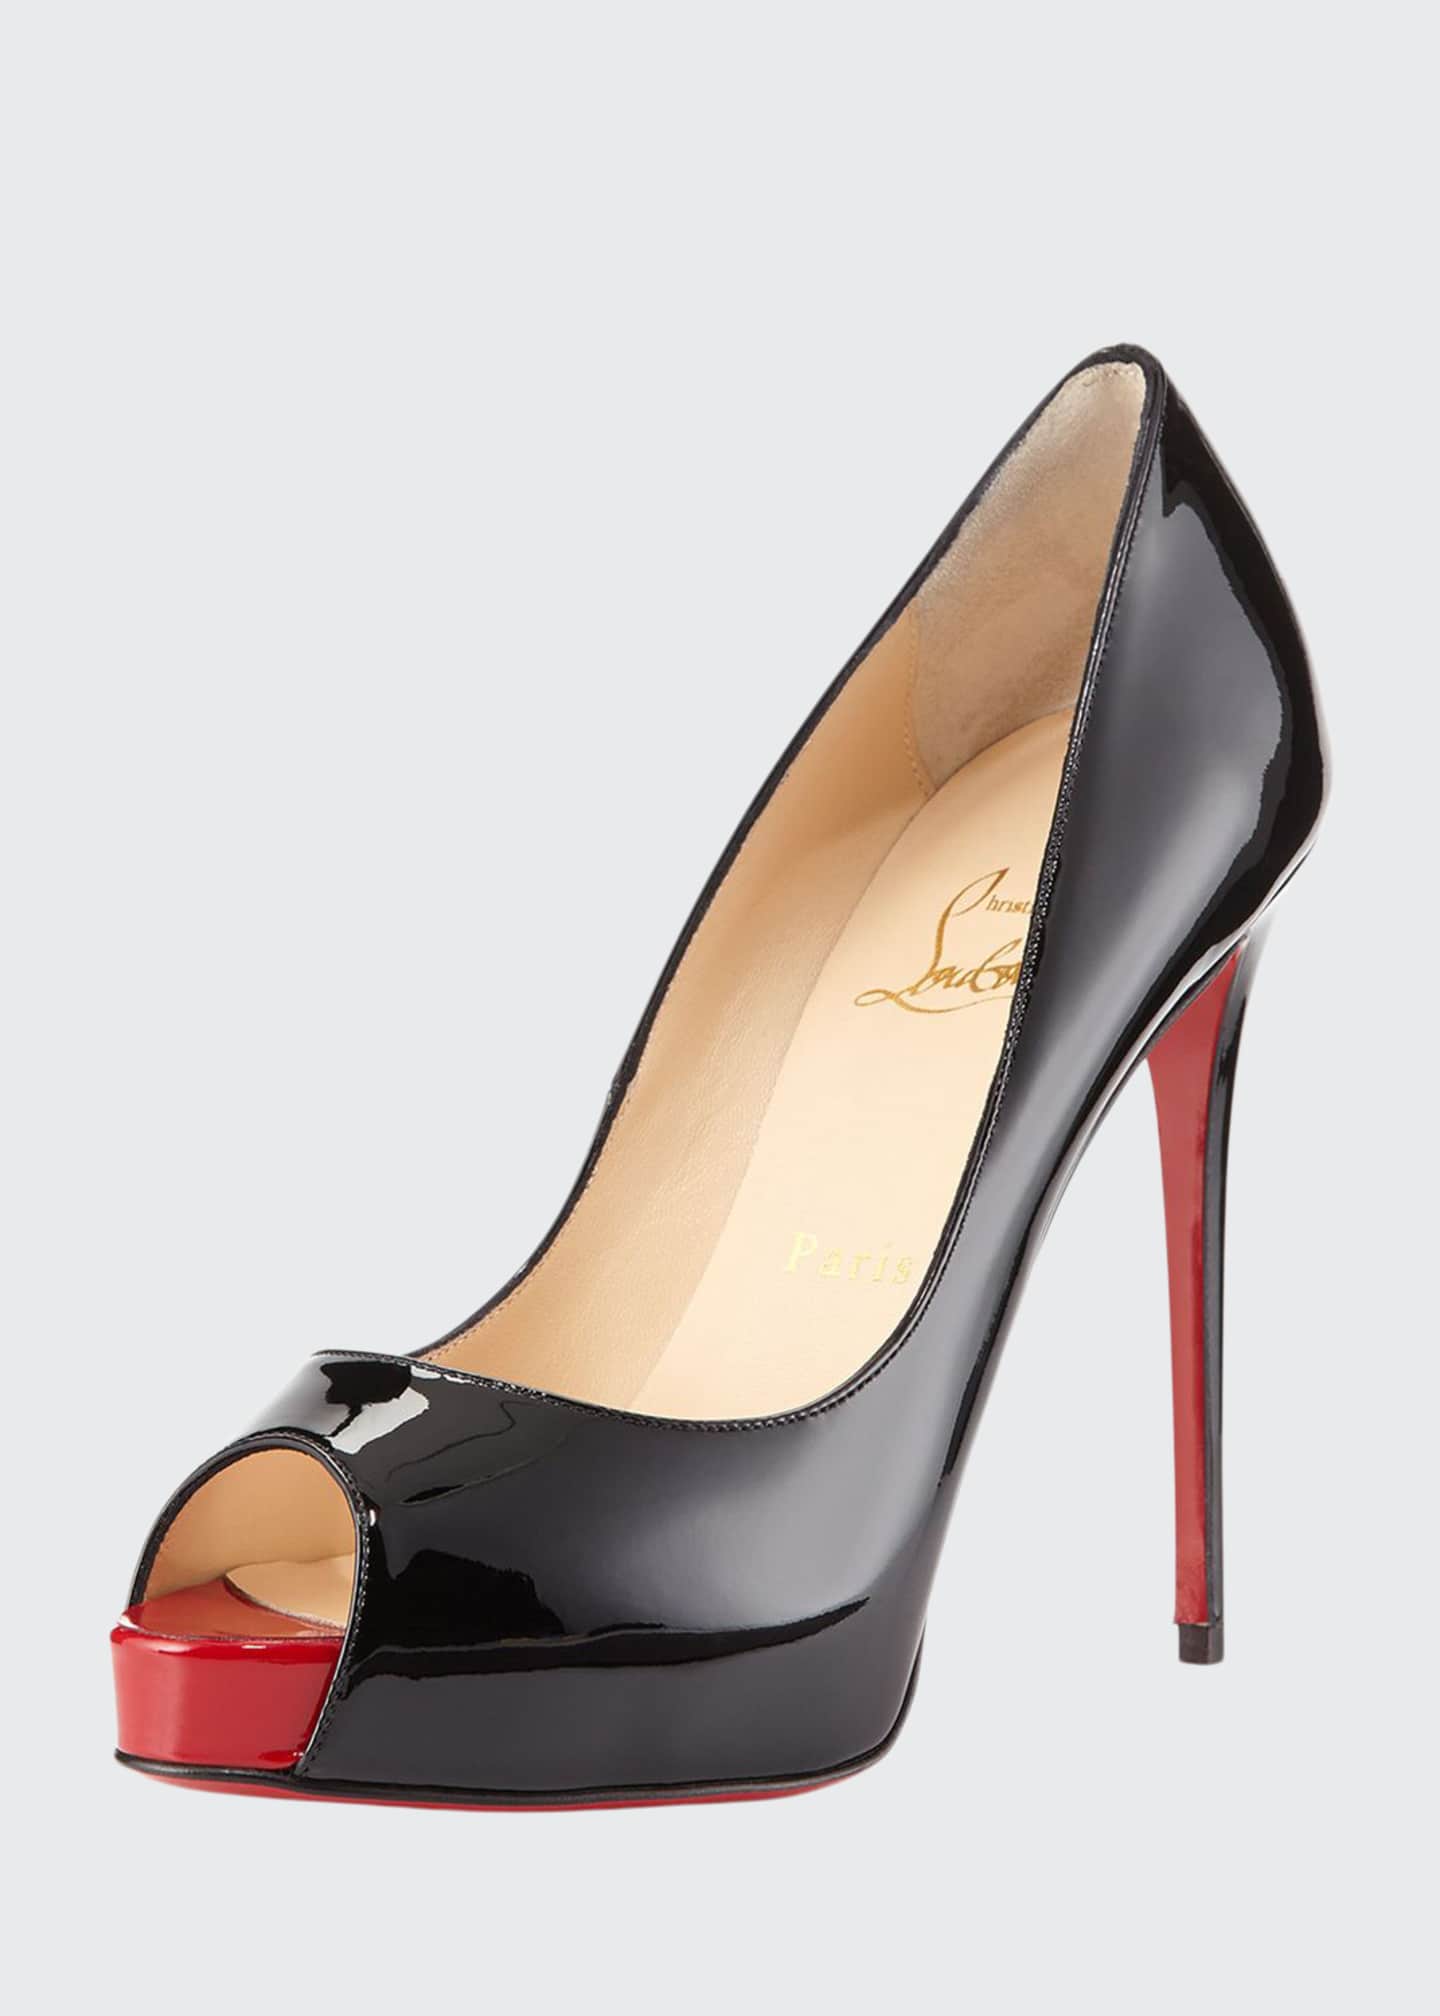 Christian Louboutin Apostrophy Pointed Red-Sole Pump, Nude